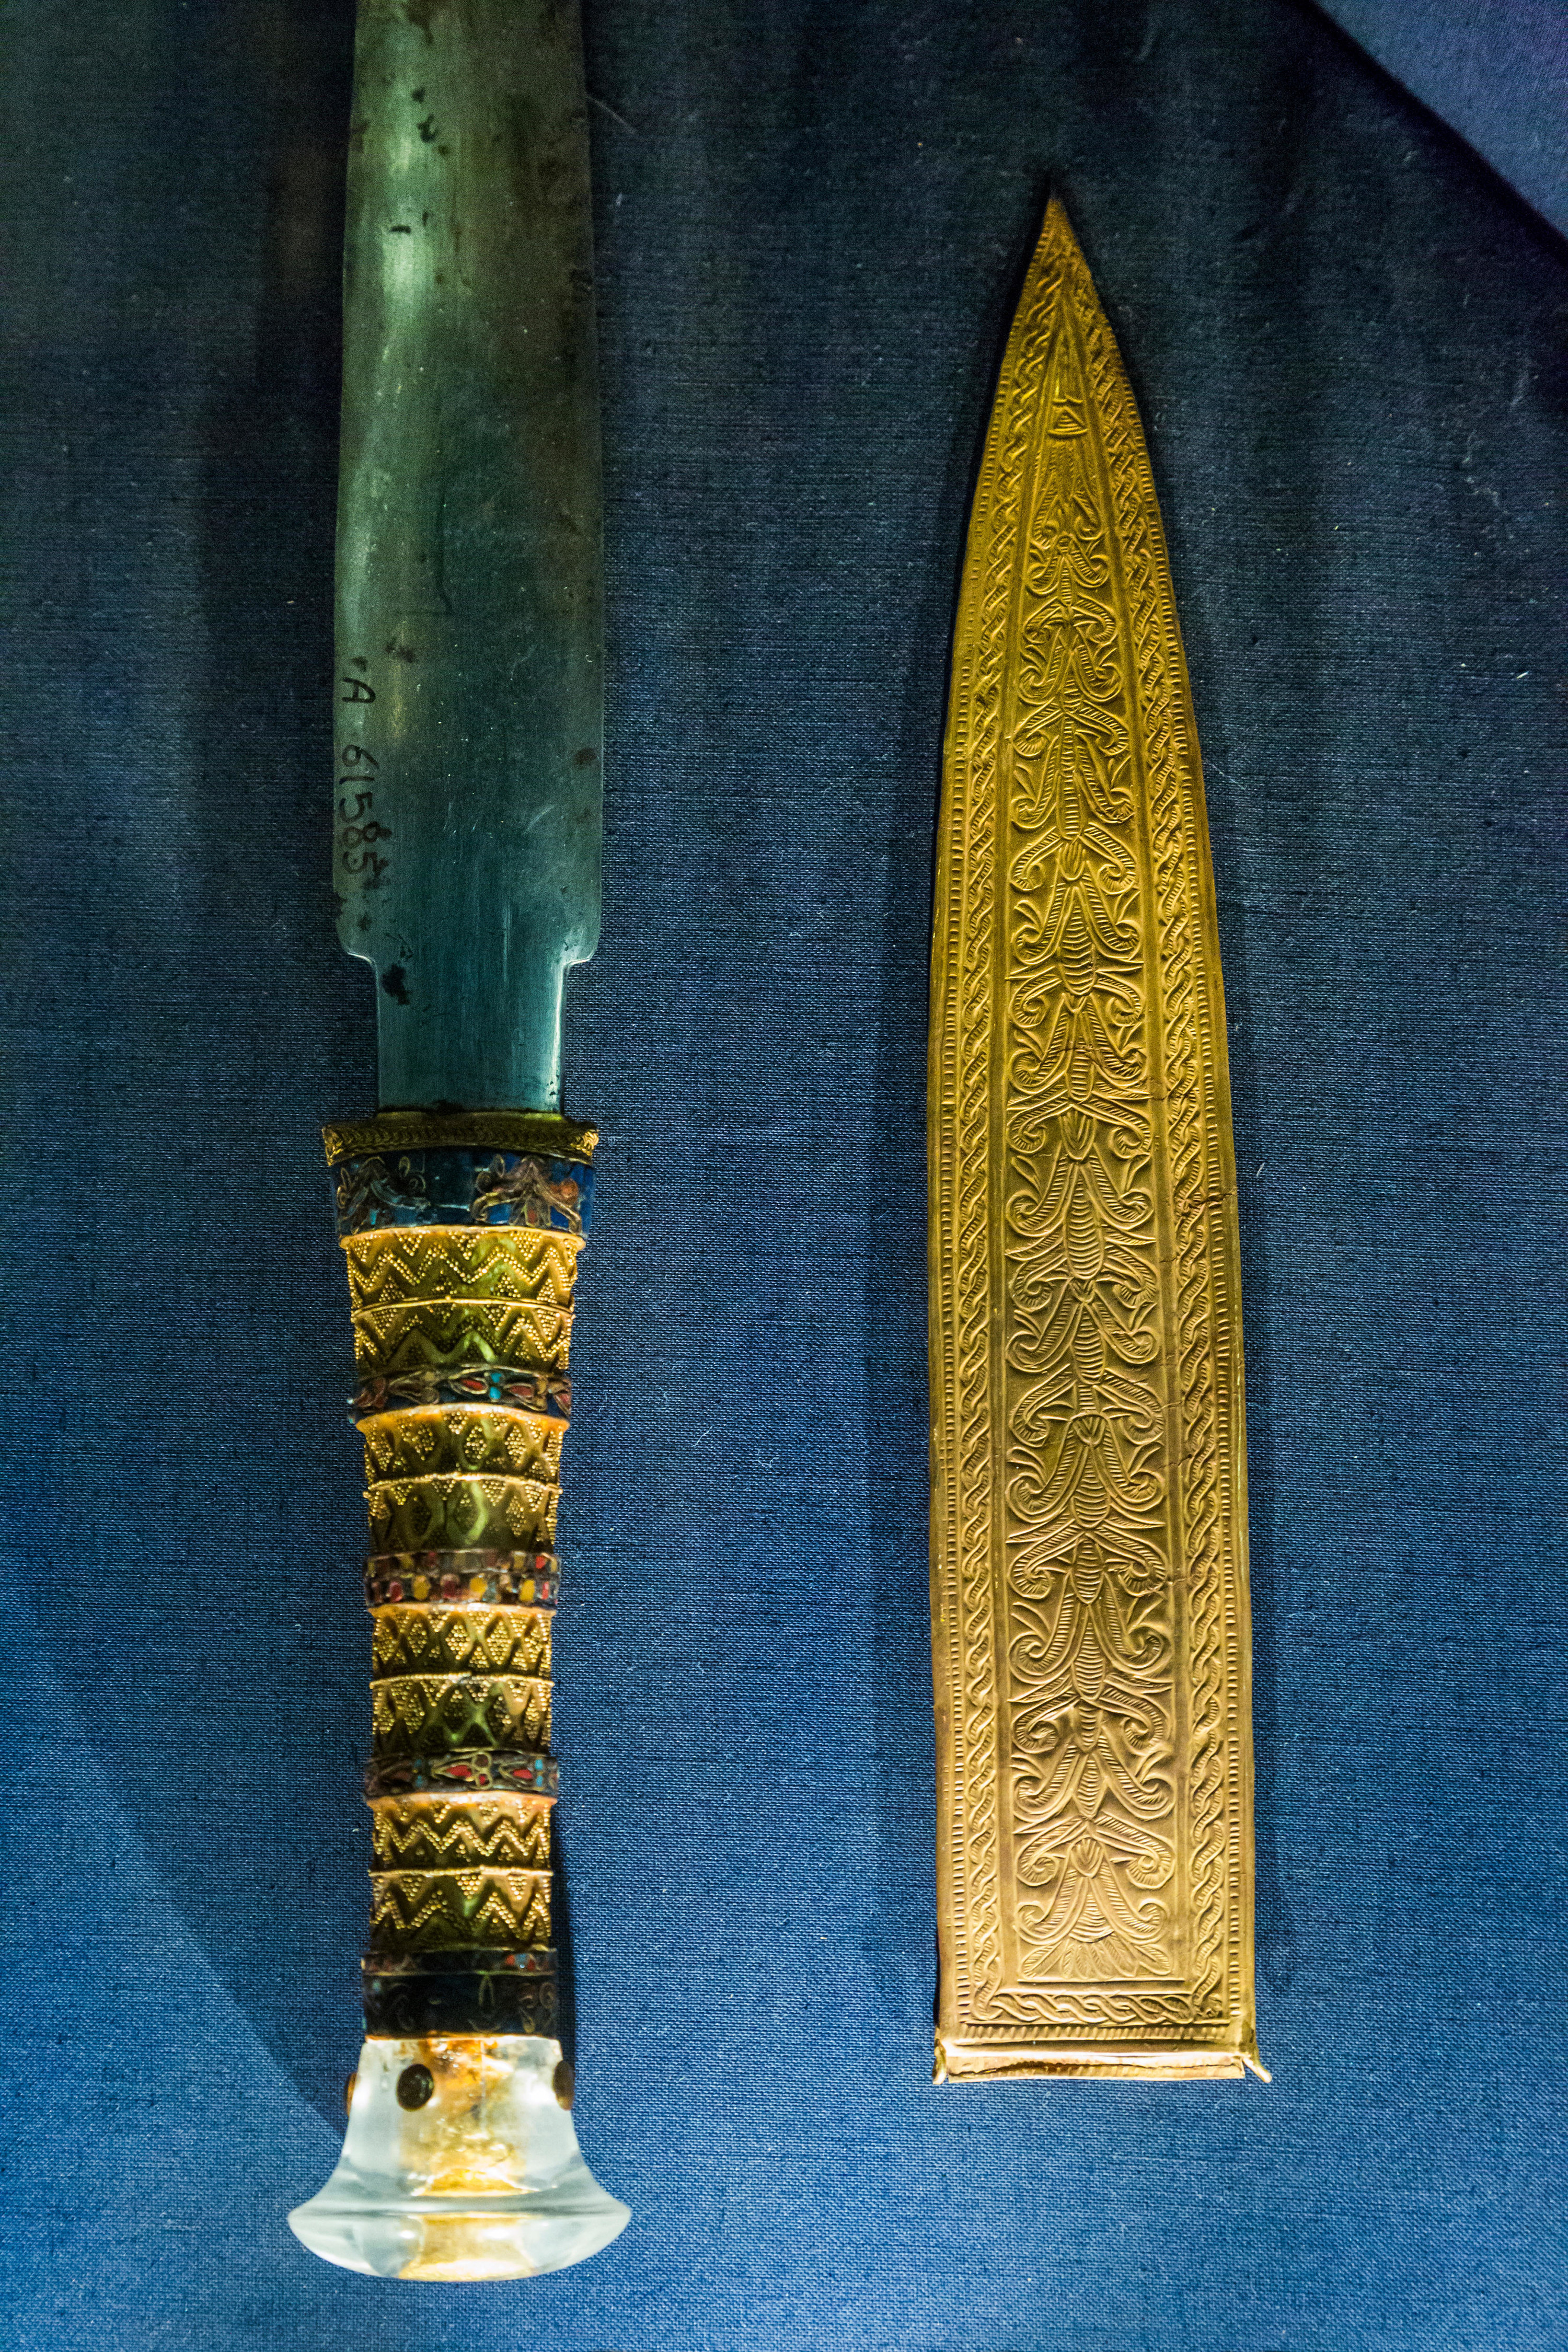 An ancient dagger with a hilt and sheath made of gold